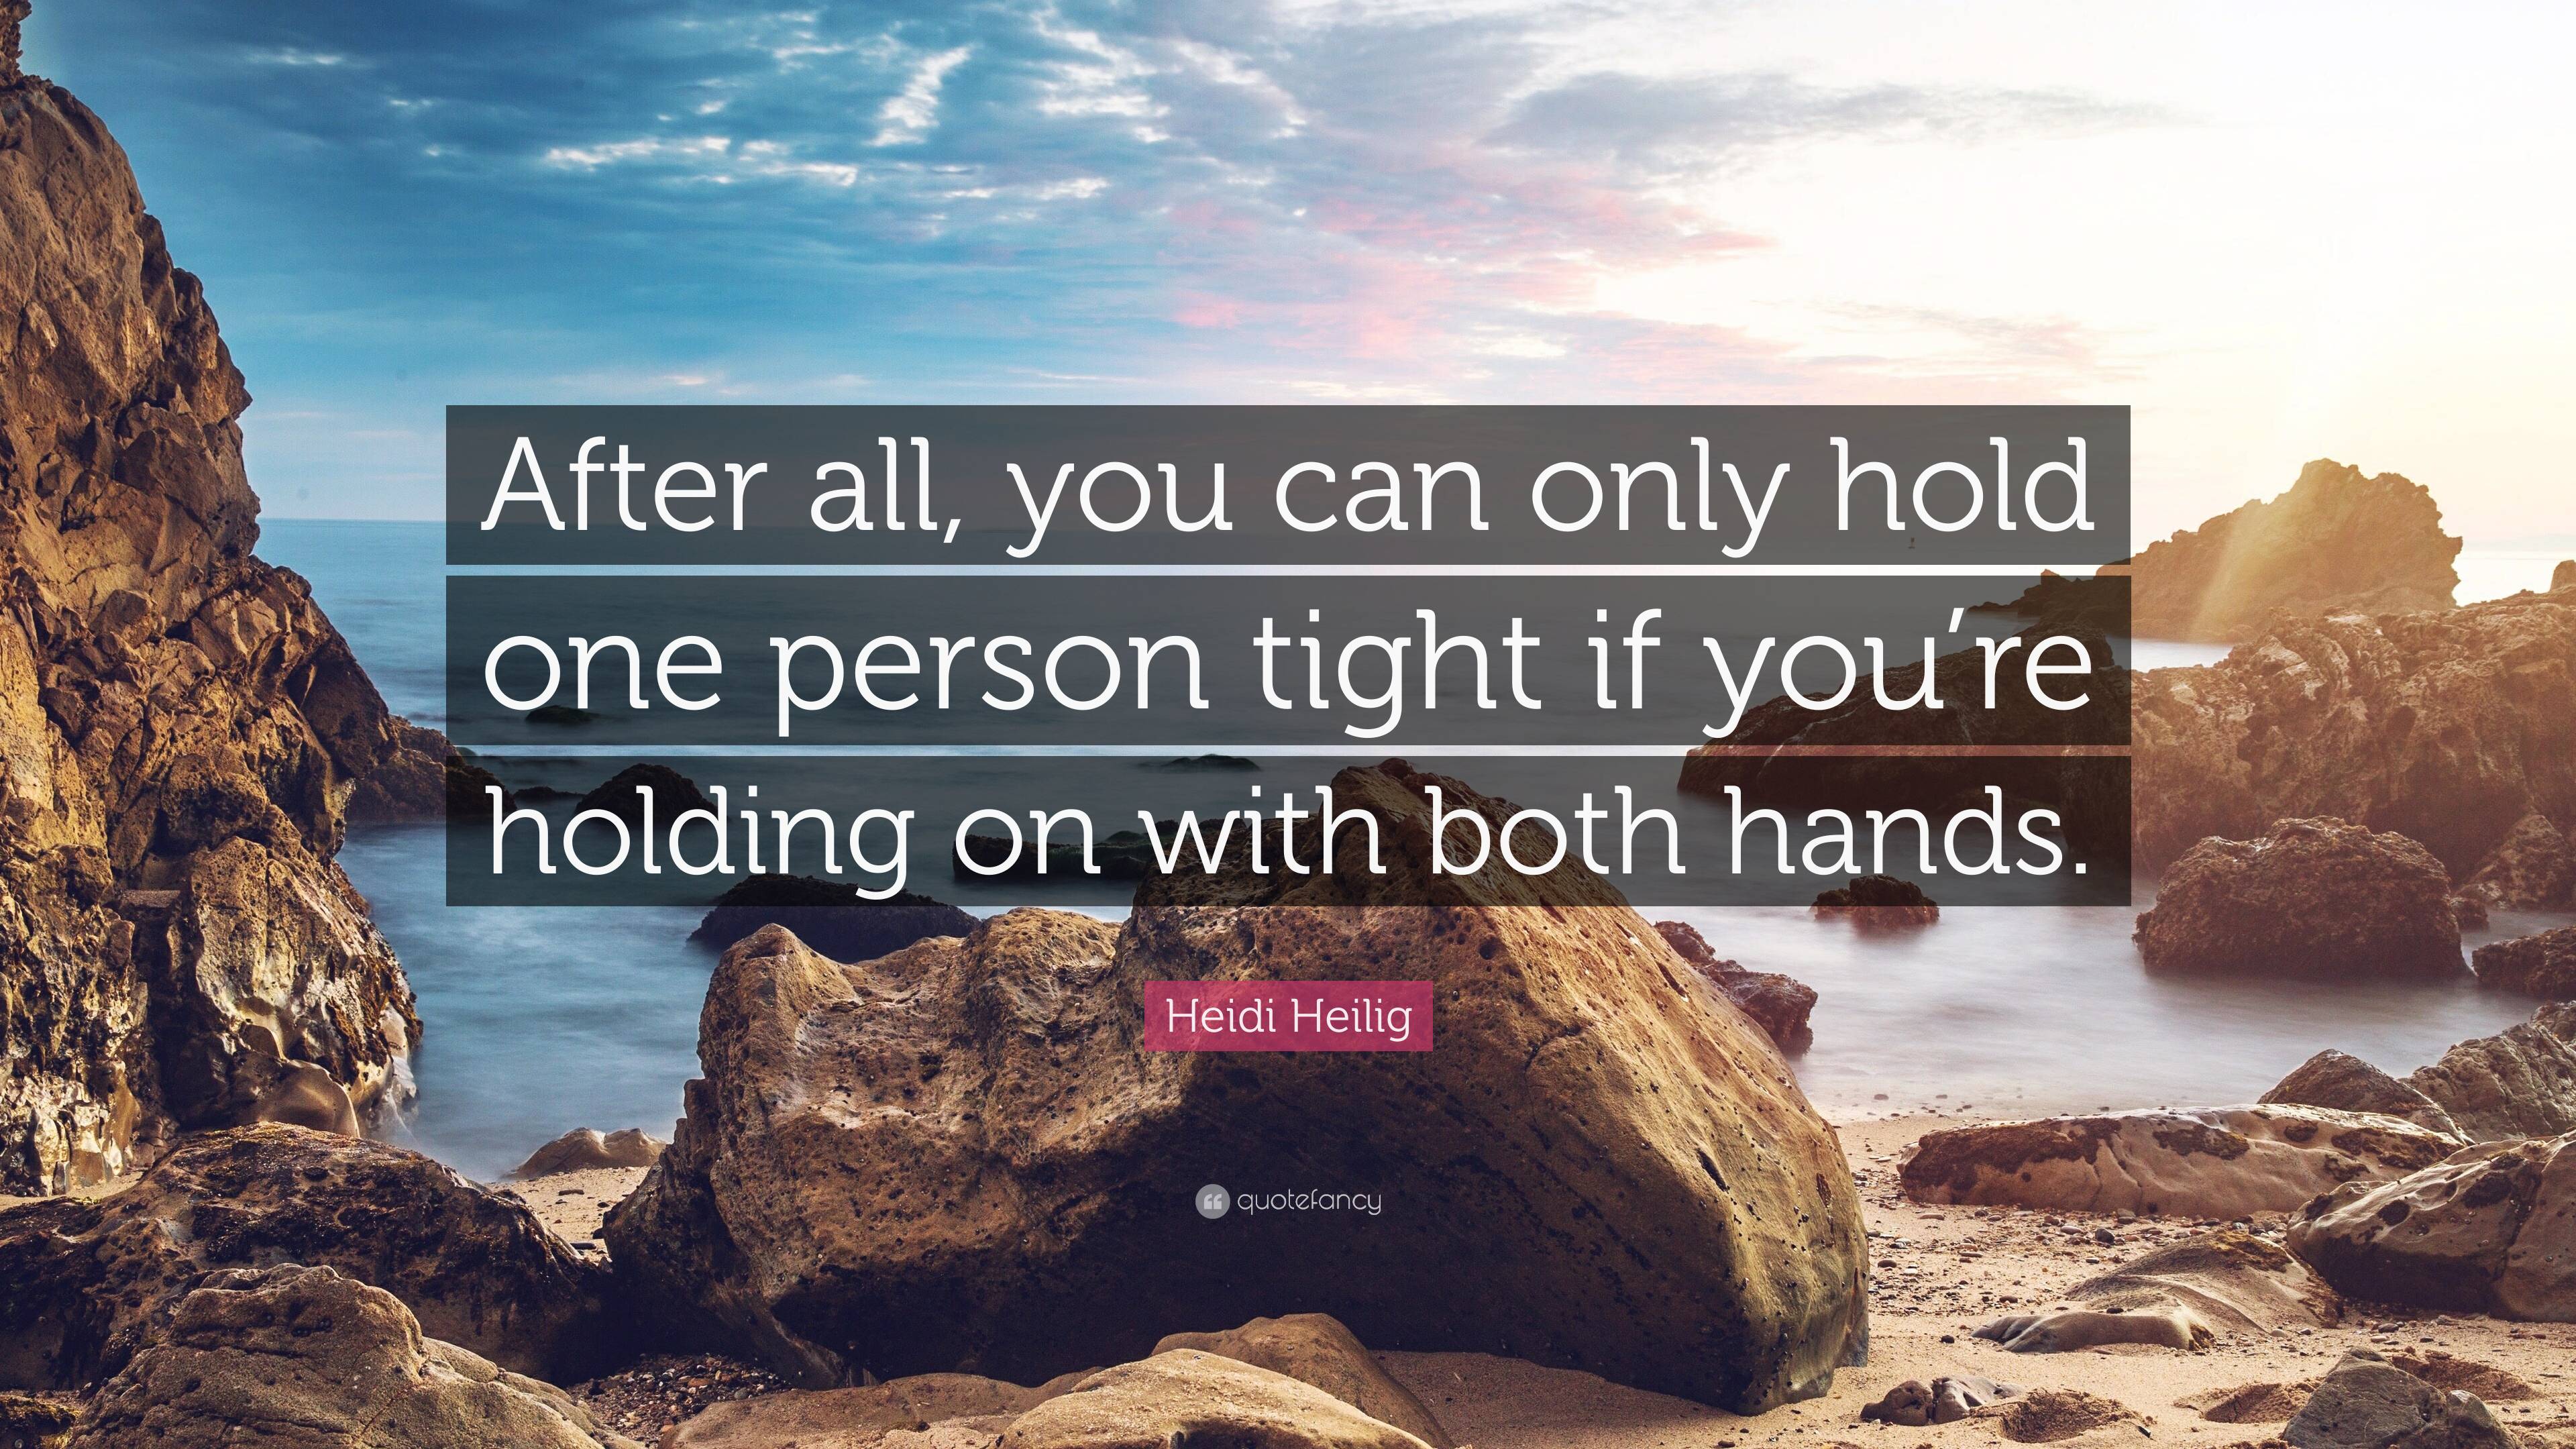 Heidi Heilig Quote: “After all, you can only hold one person tight if ...